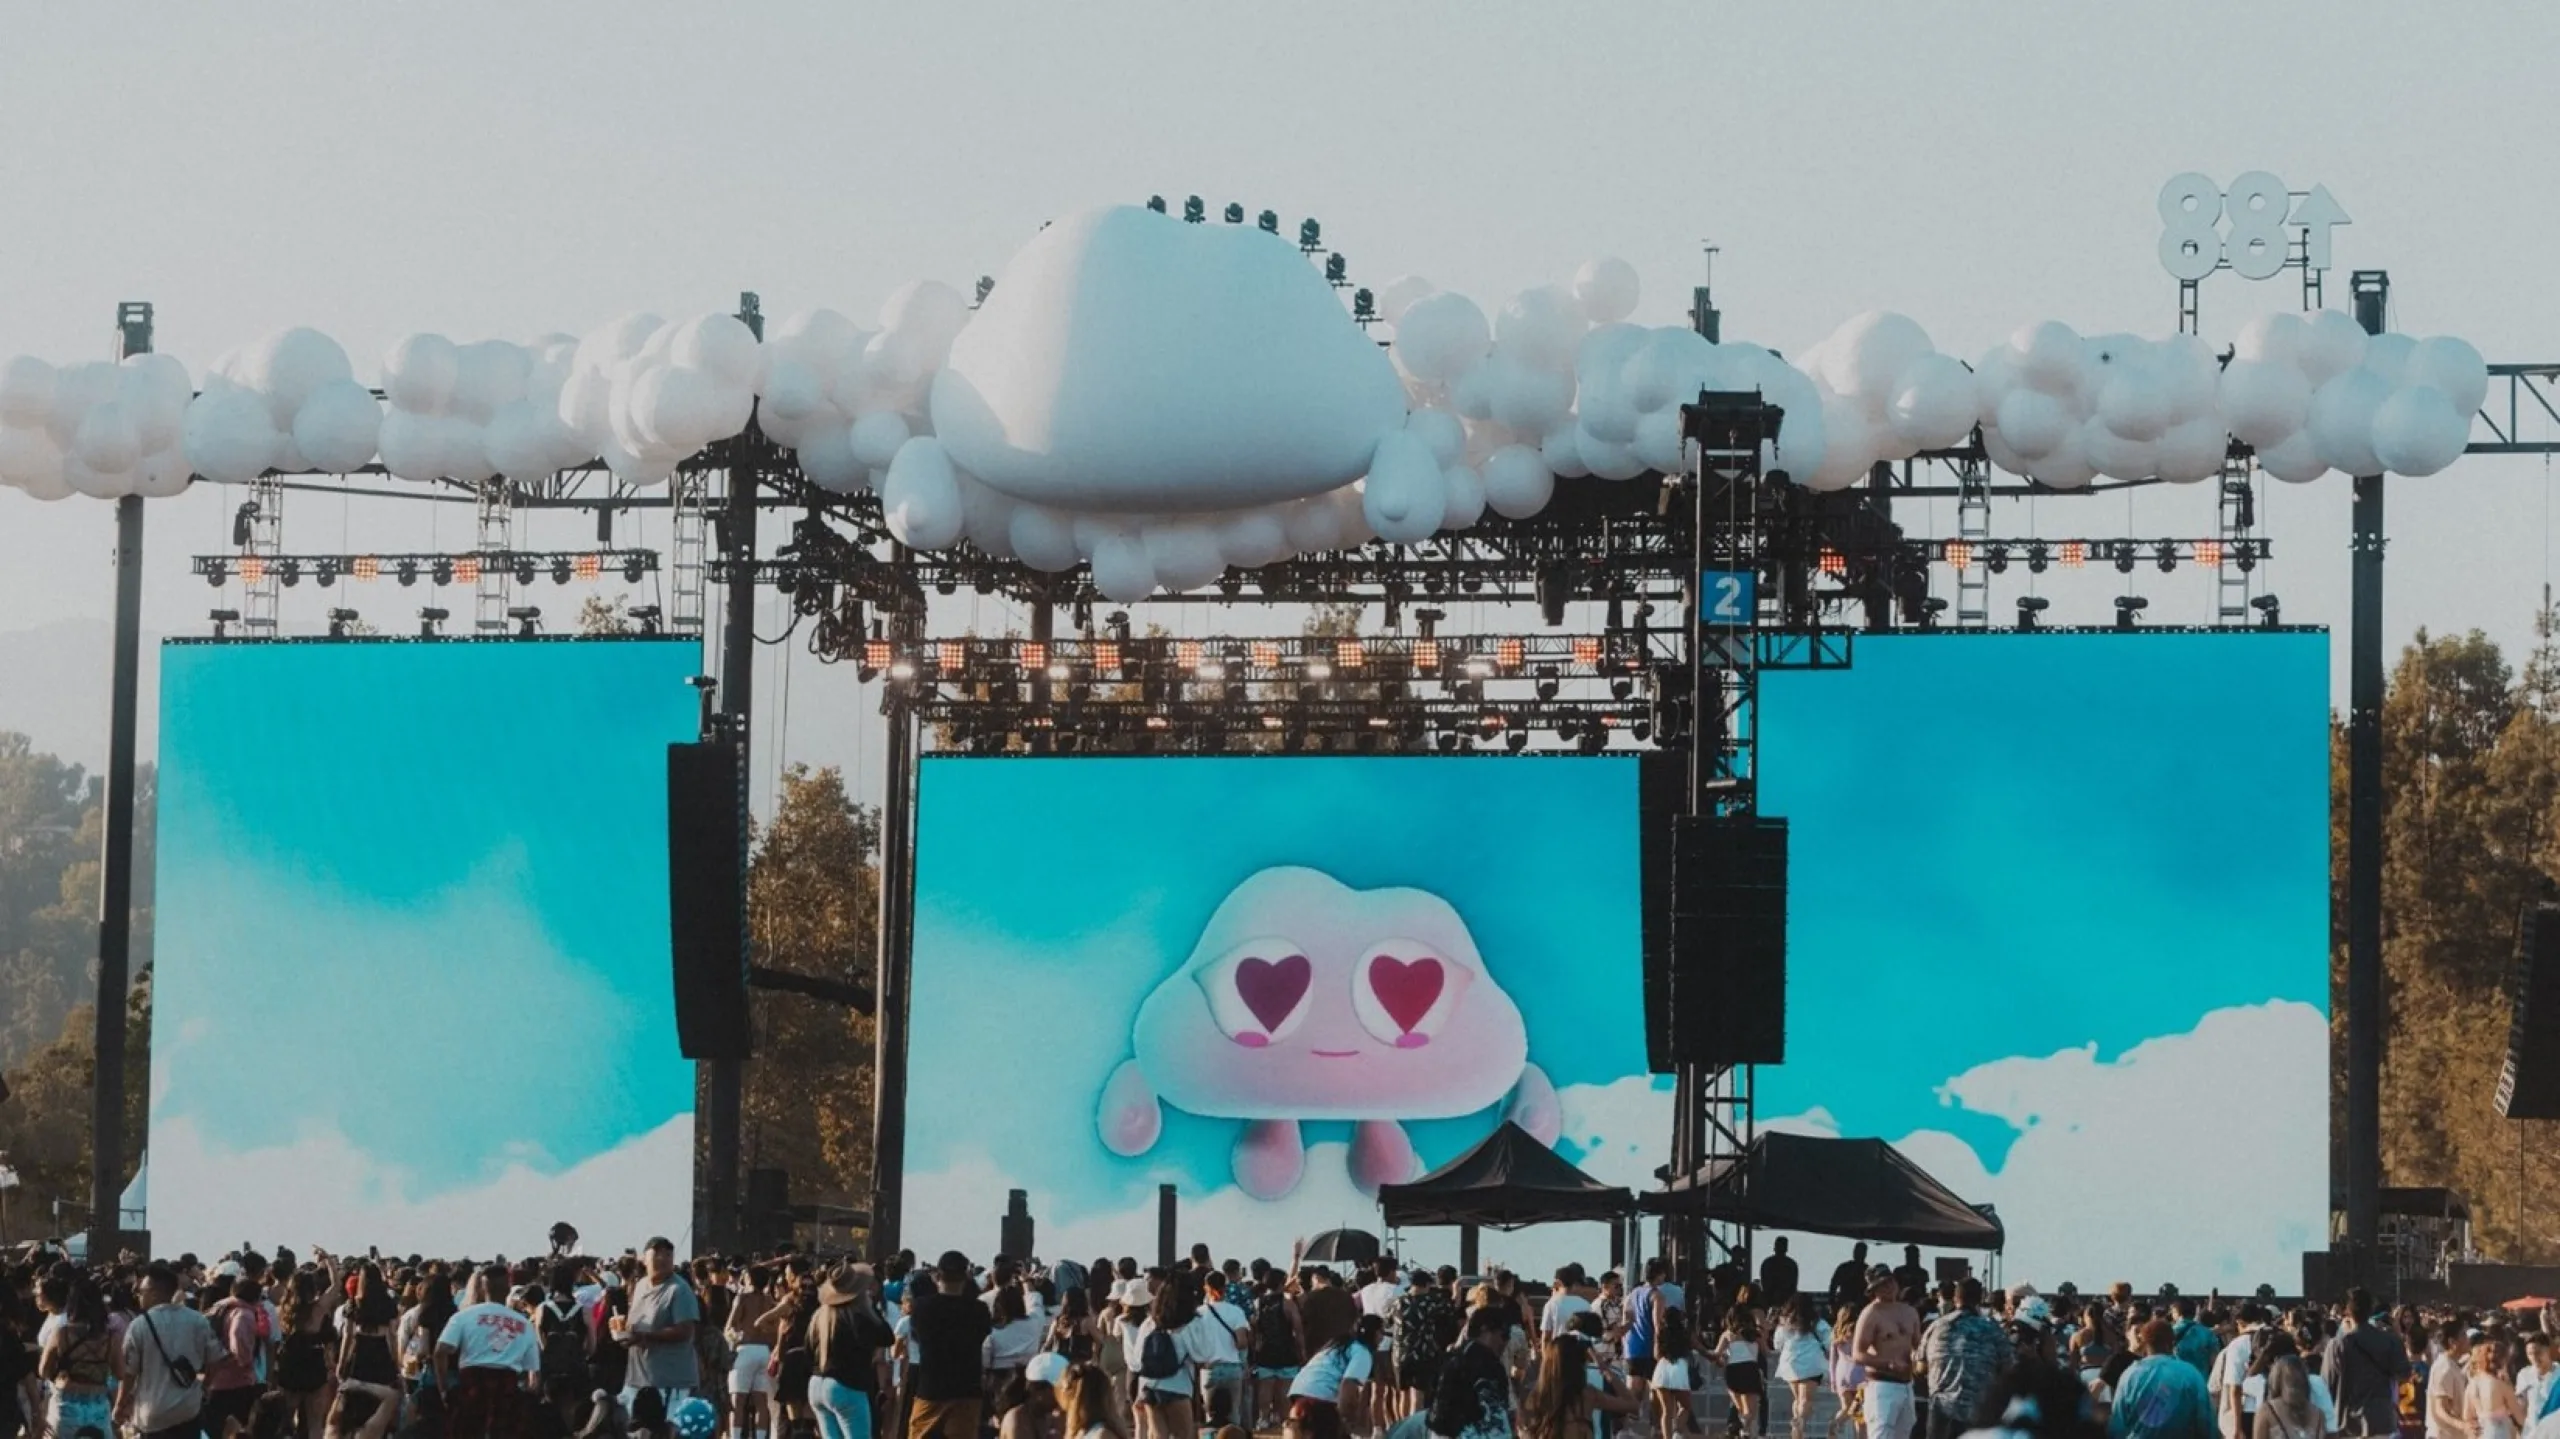 A crowd of people in front of a large stage with a screen displaying a cloud, with cloud decorations on the top